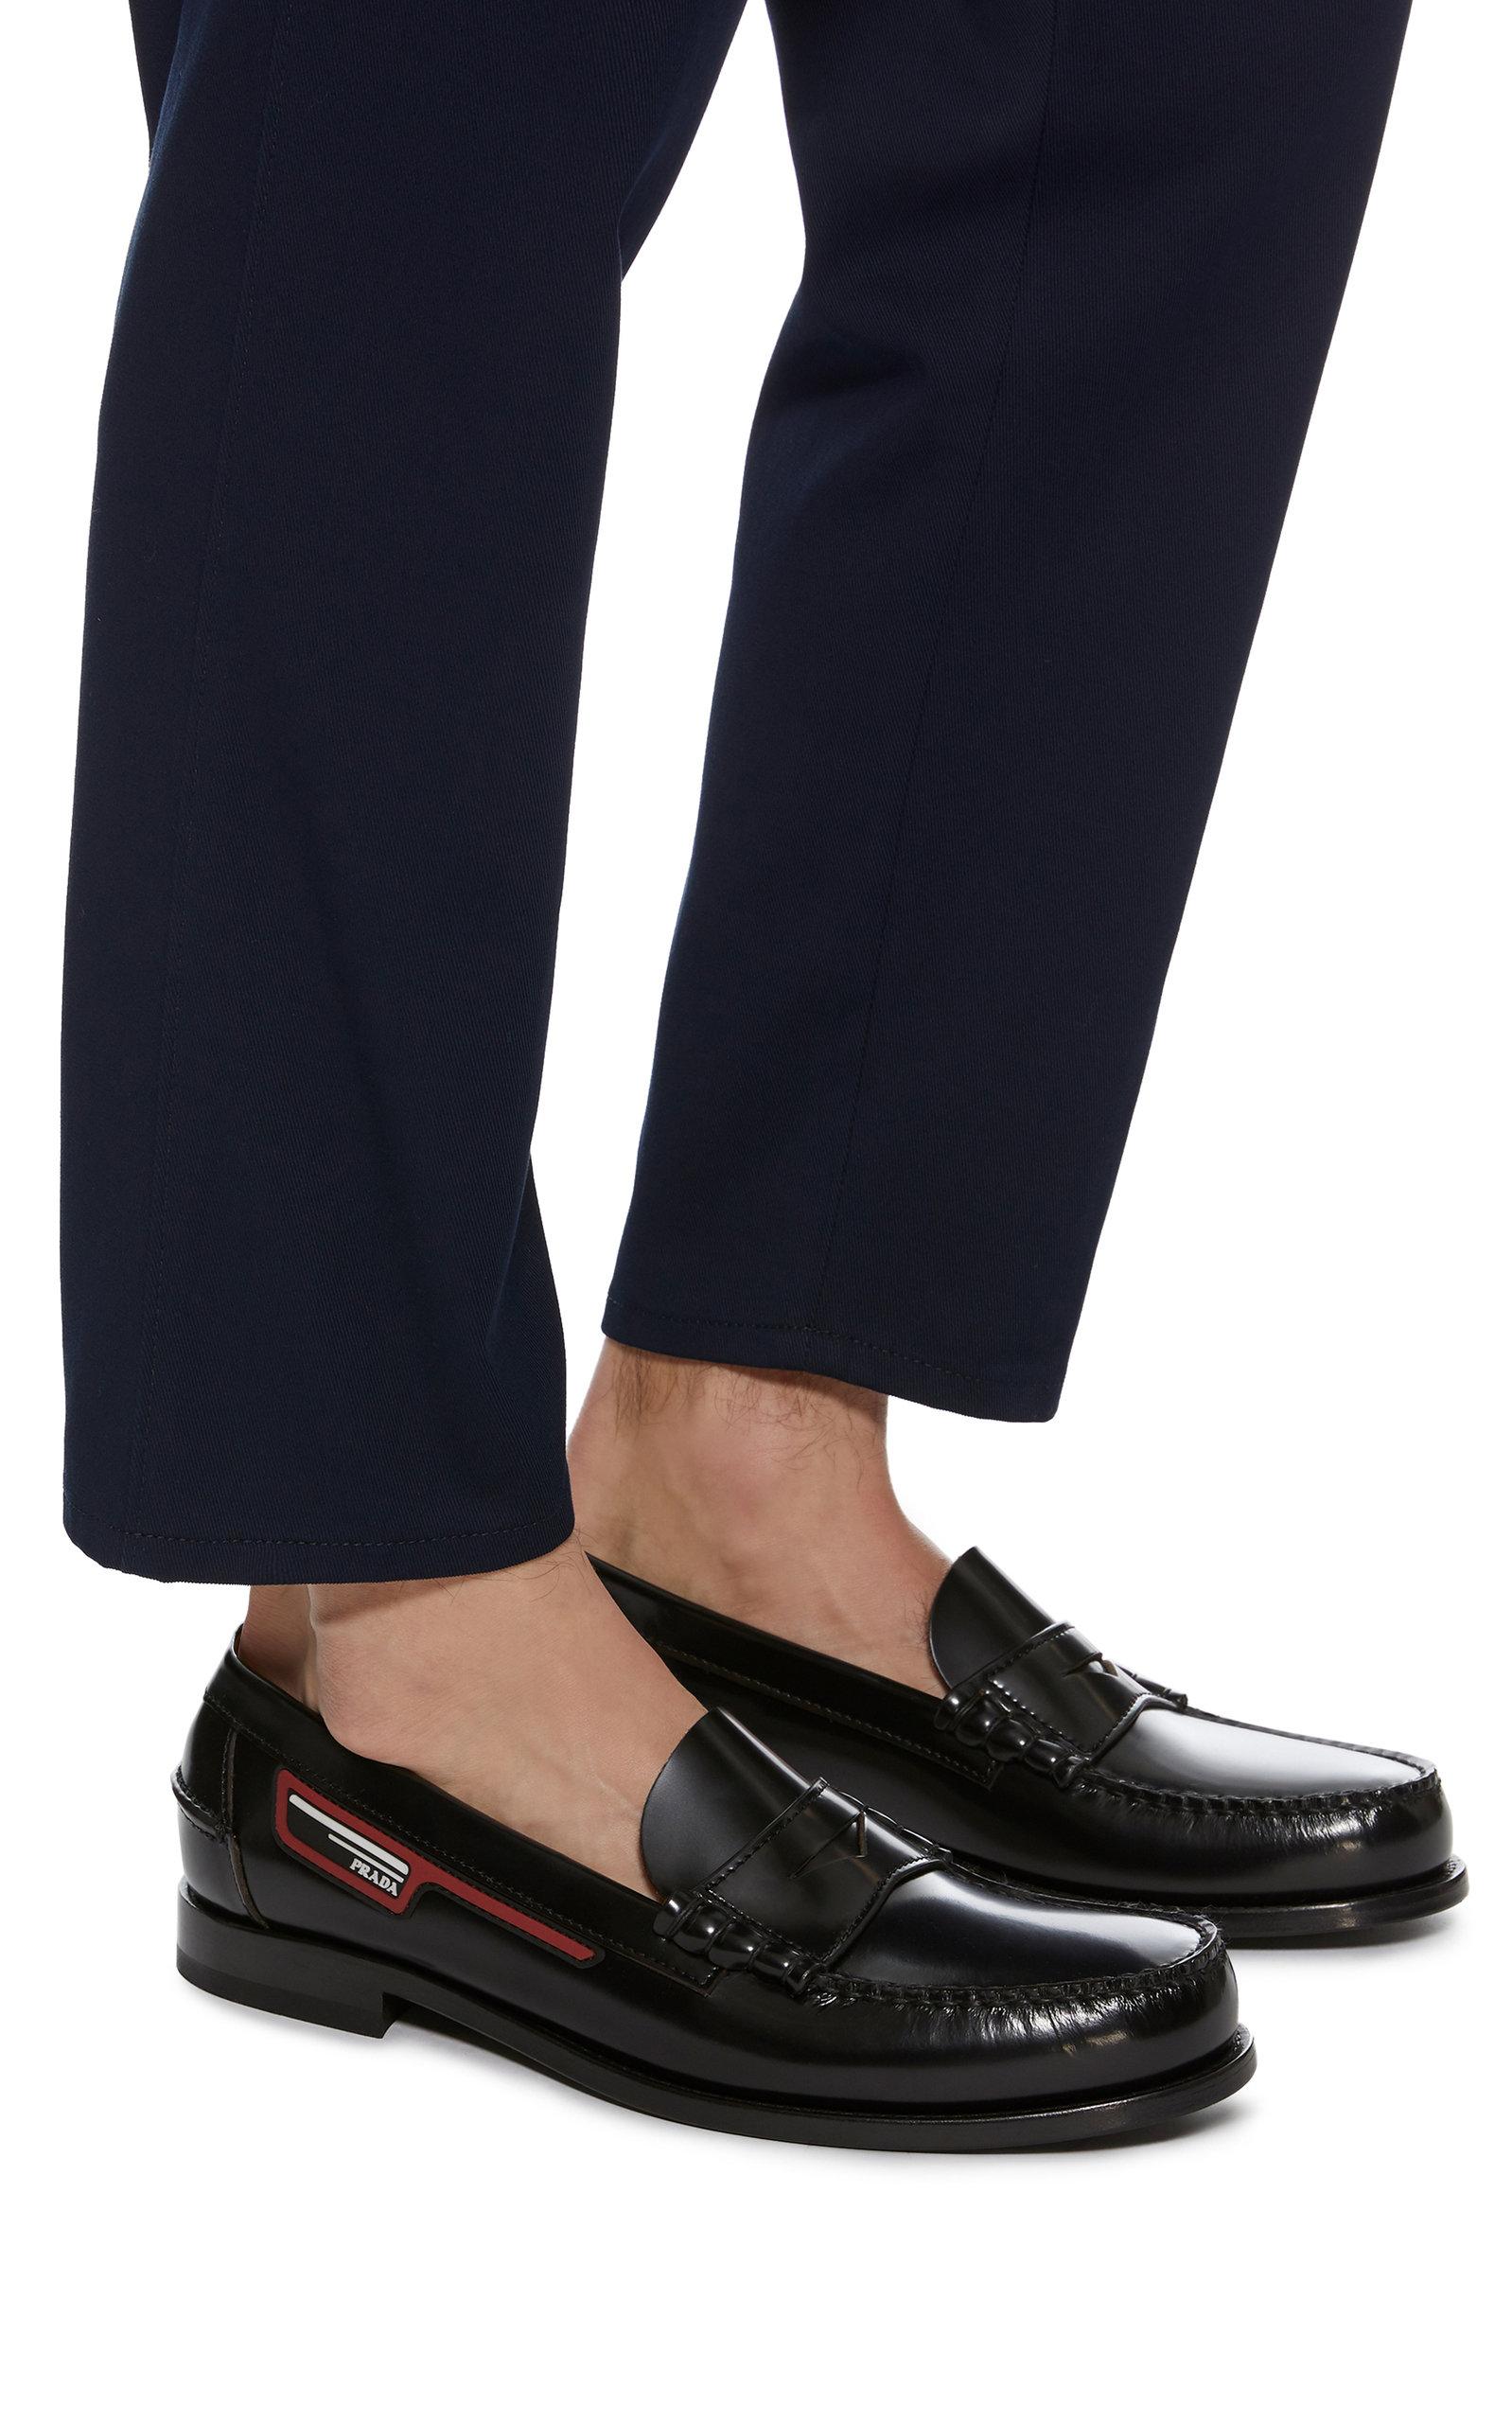 Penny Loafer Prada Best Sale, SAVE 46% - aveclumiere.com